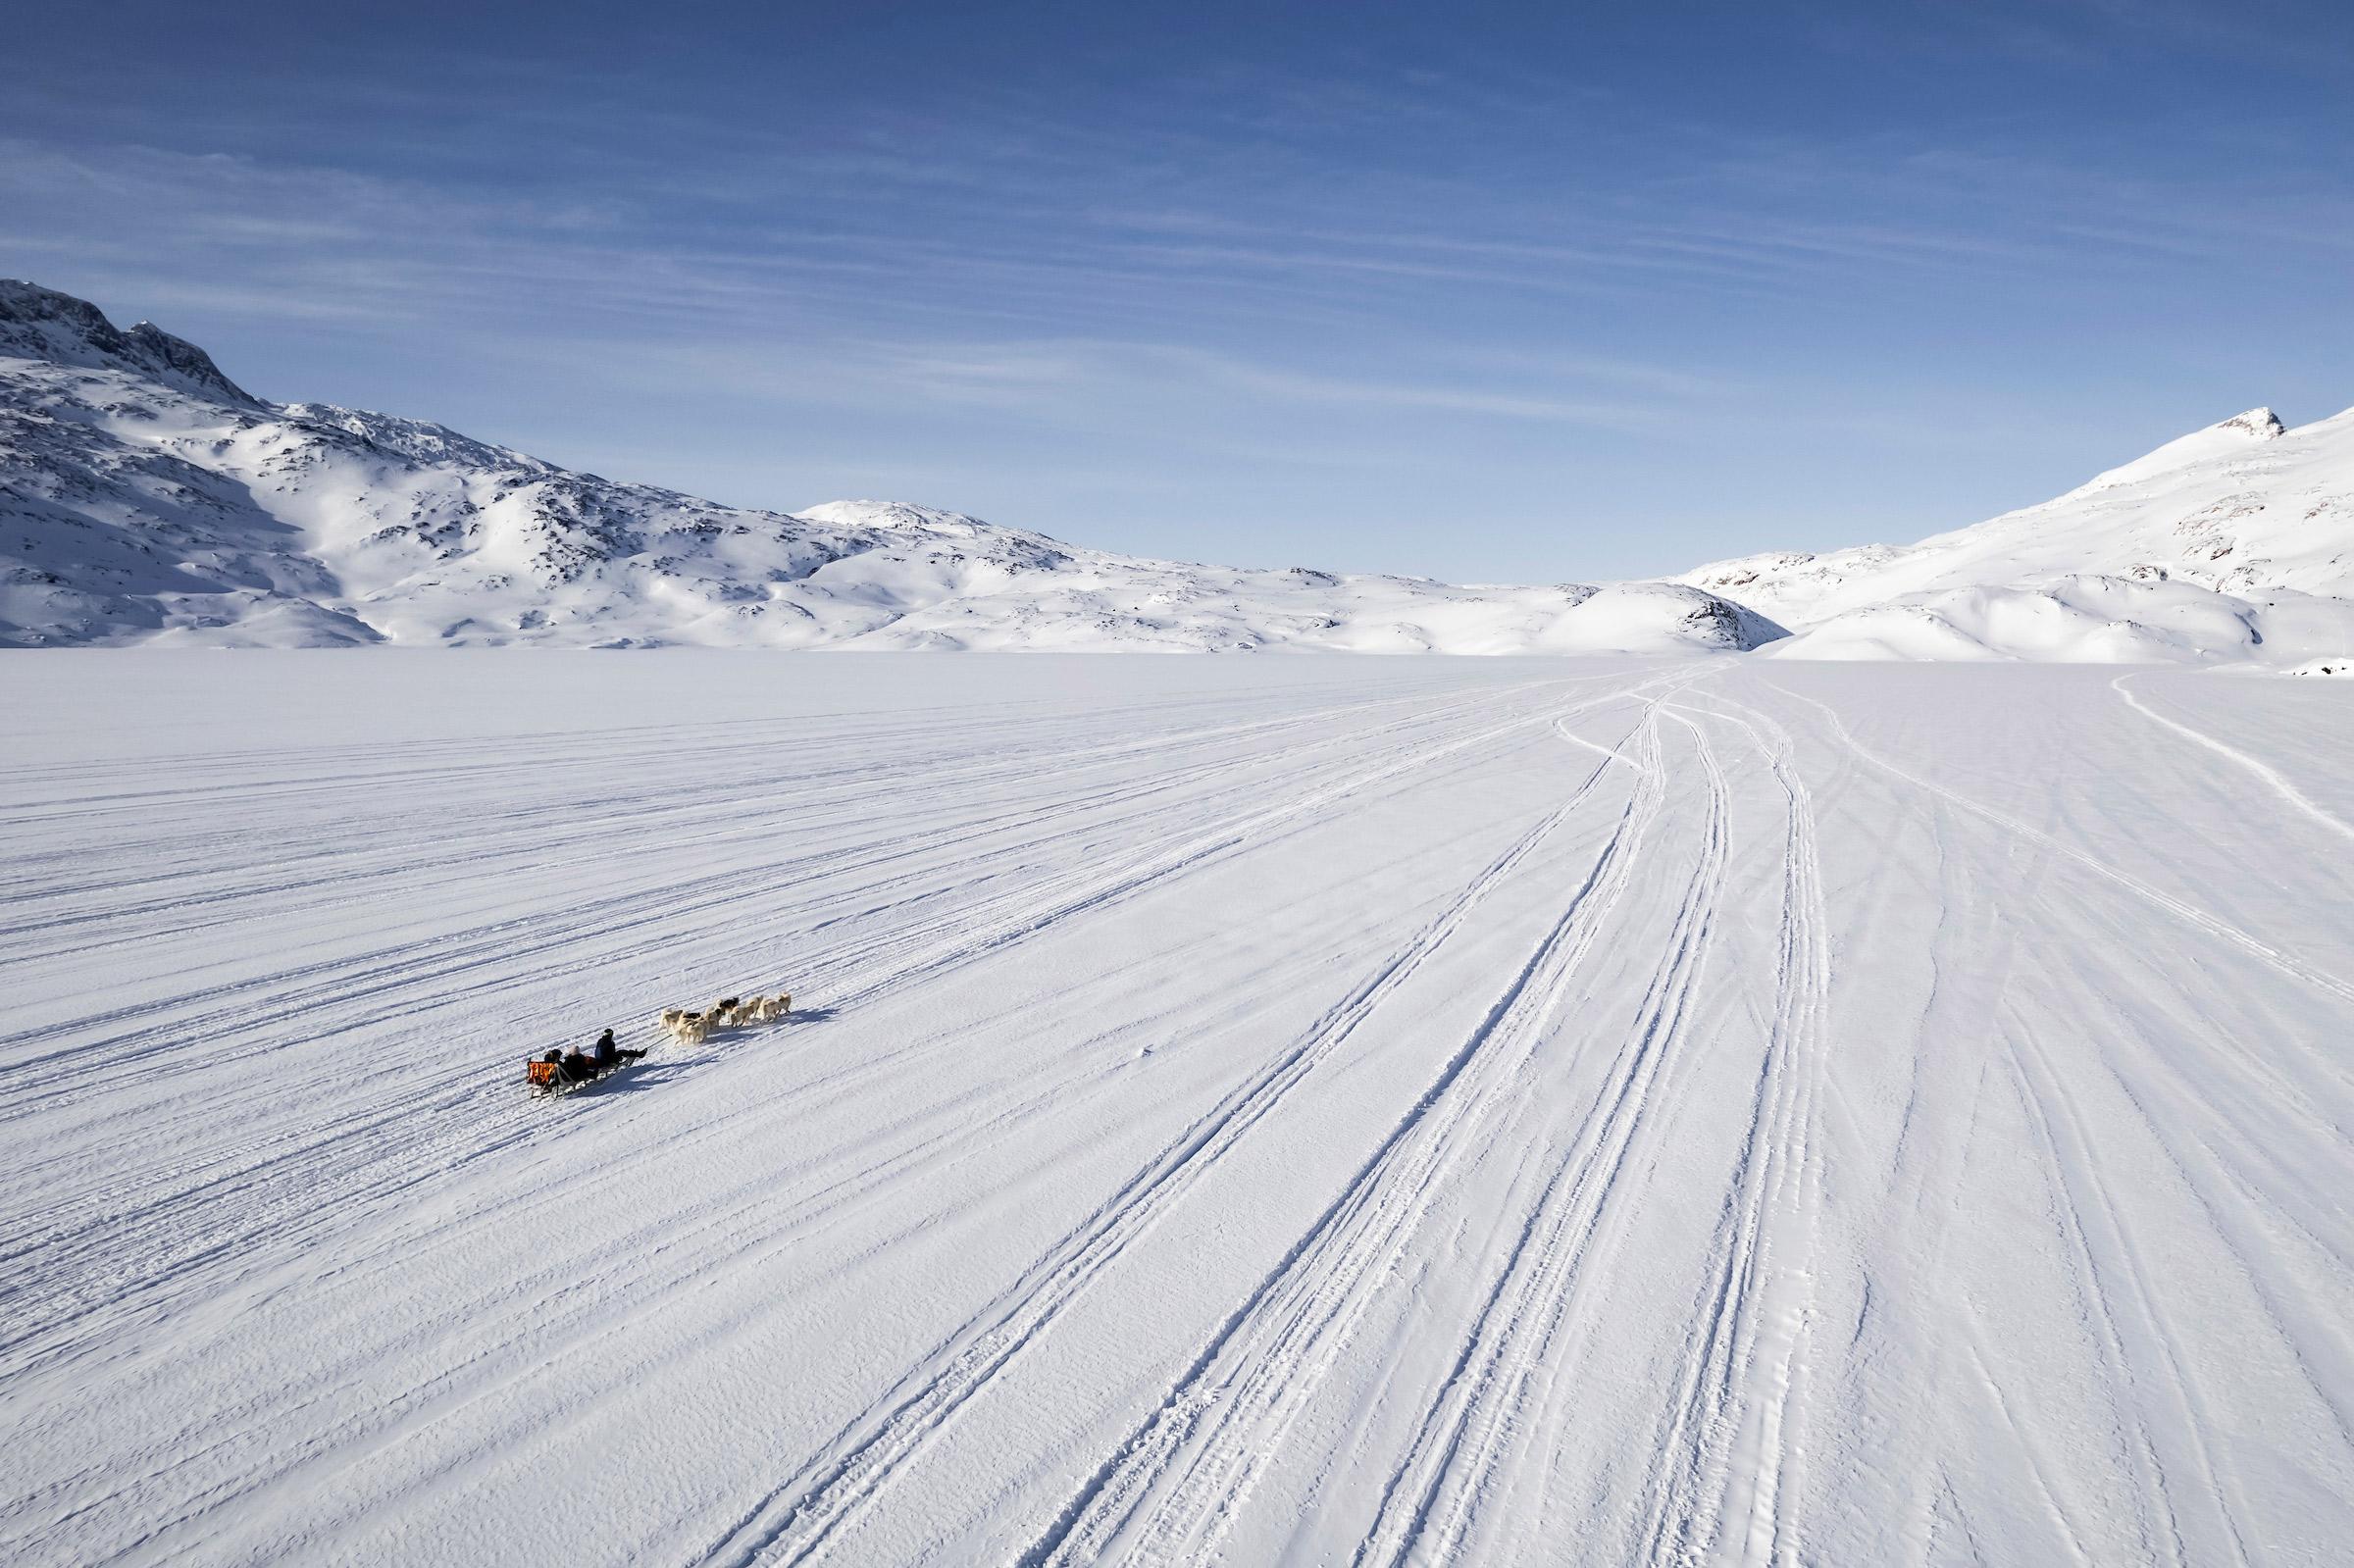 Dogsledding in the east. Photo by Aningaaq Rosing Carlsen - Visit Greenland